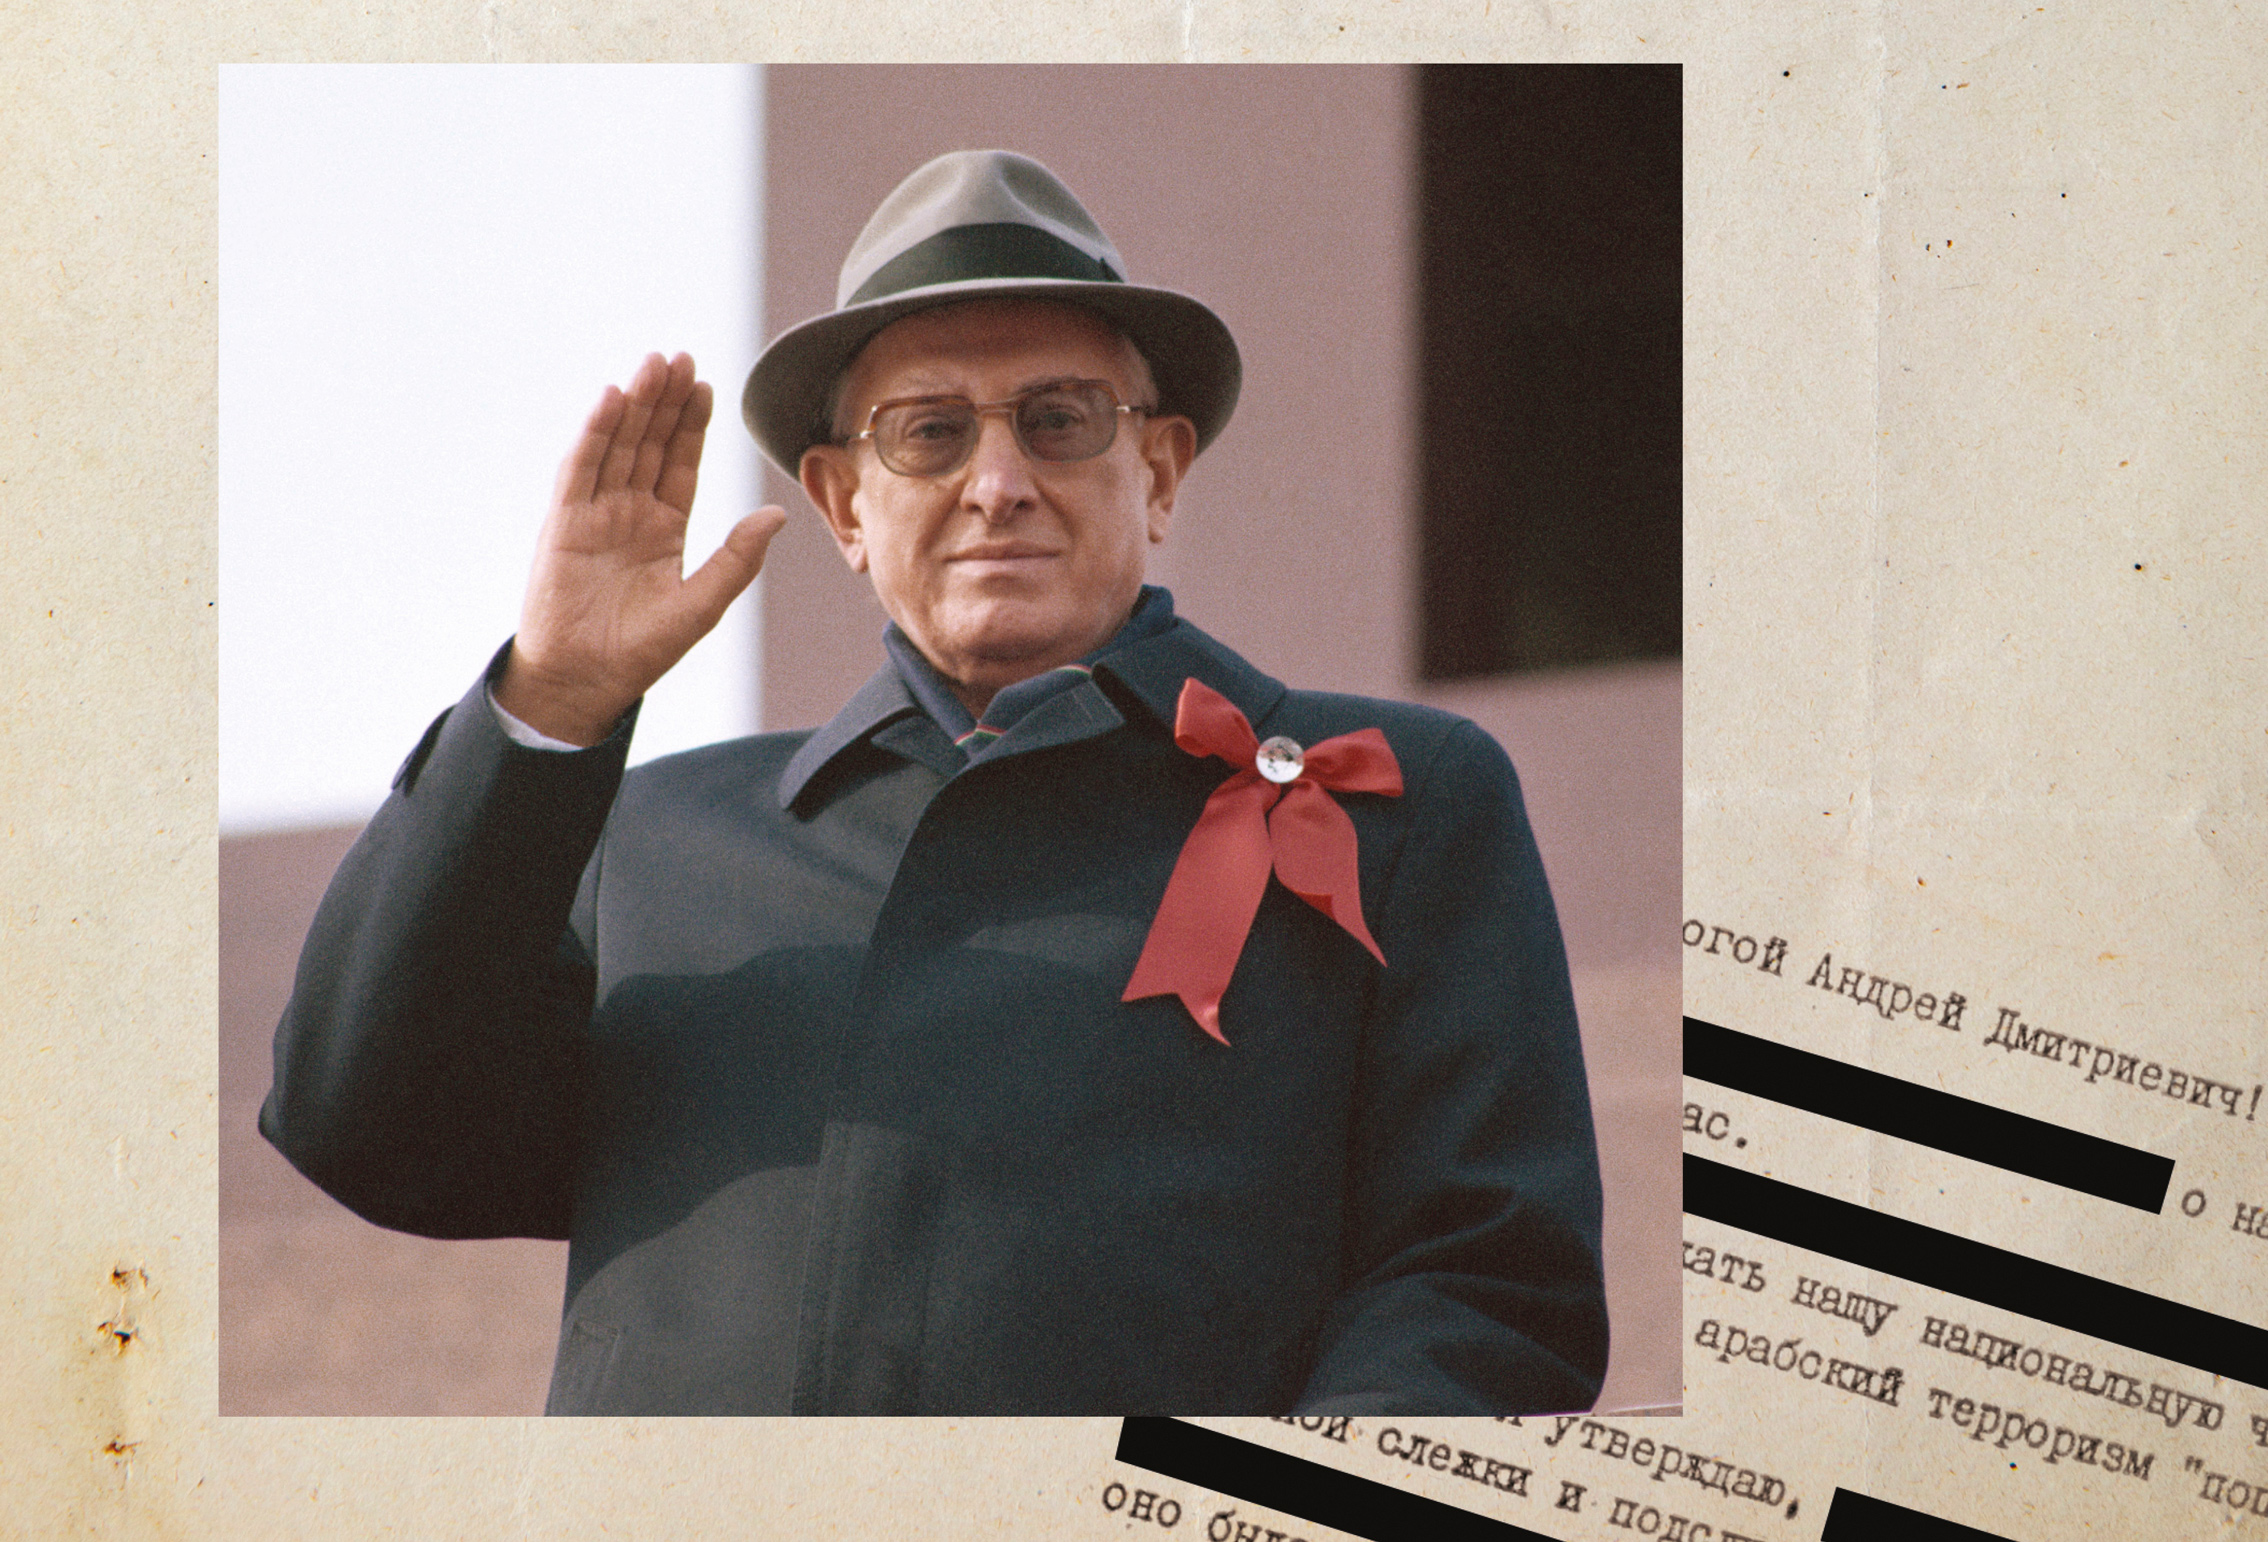 Yuri Andropov the KGB chairman whose extreme paranoia prompted Operation RYAN - photo 24